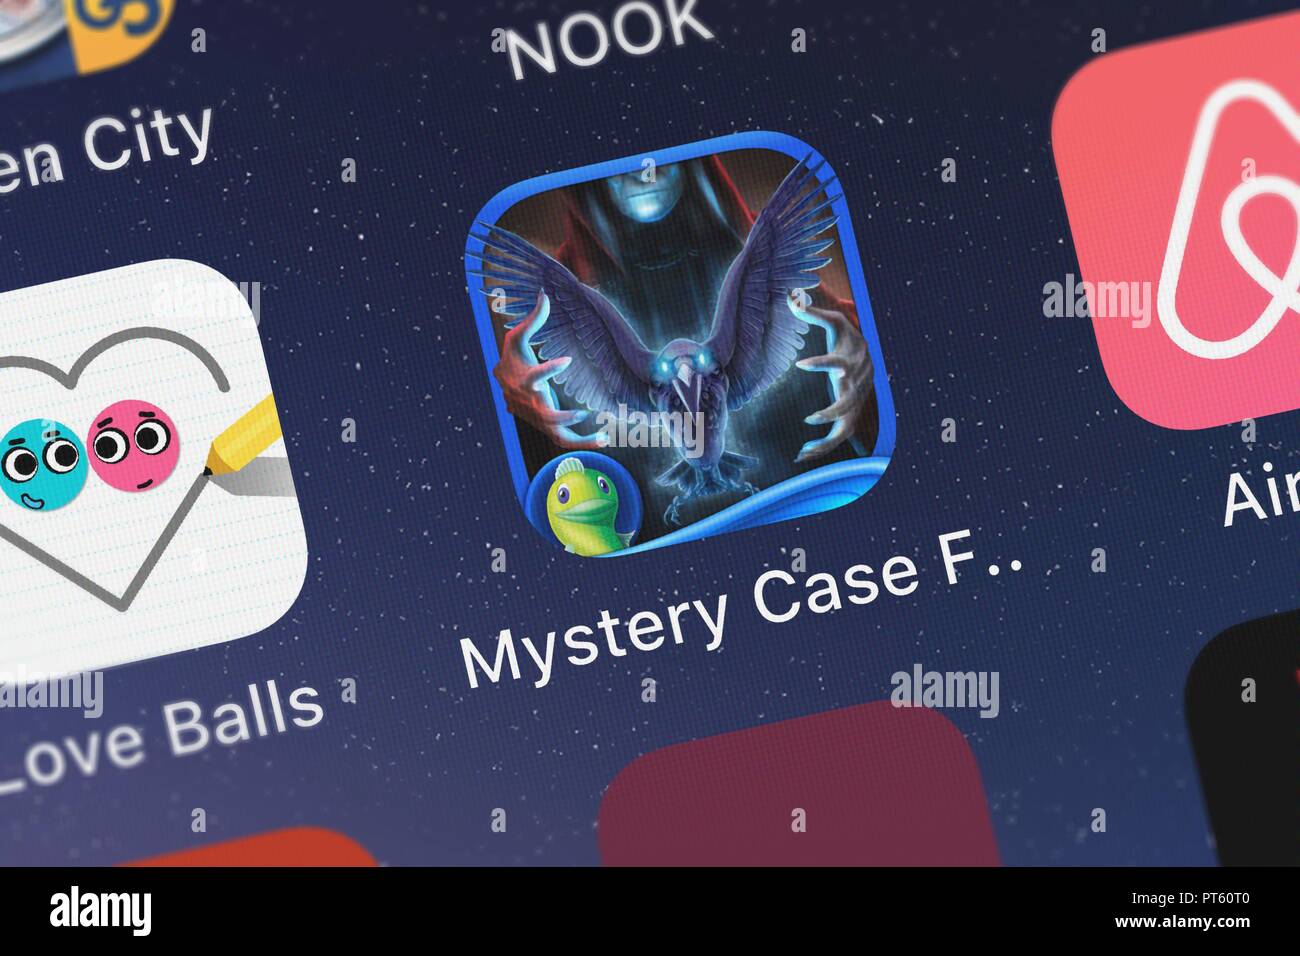 London, United Kingdom - October 06, 2018: Screenshot of Big Fish Games, Inc's mobile app Mystery Case Files: Key To Ravenhearst - A Mystery Hidden Ob Stock Photo